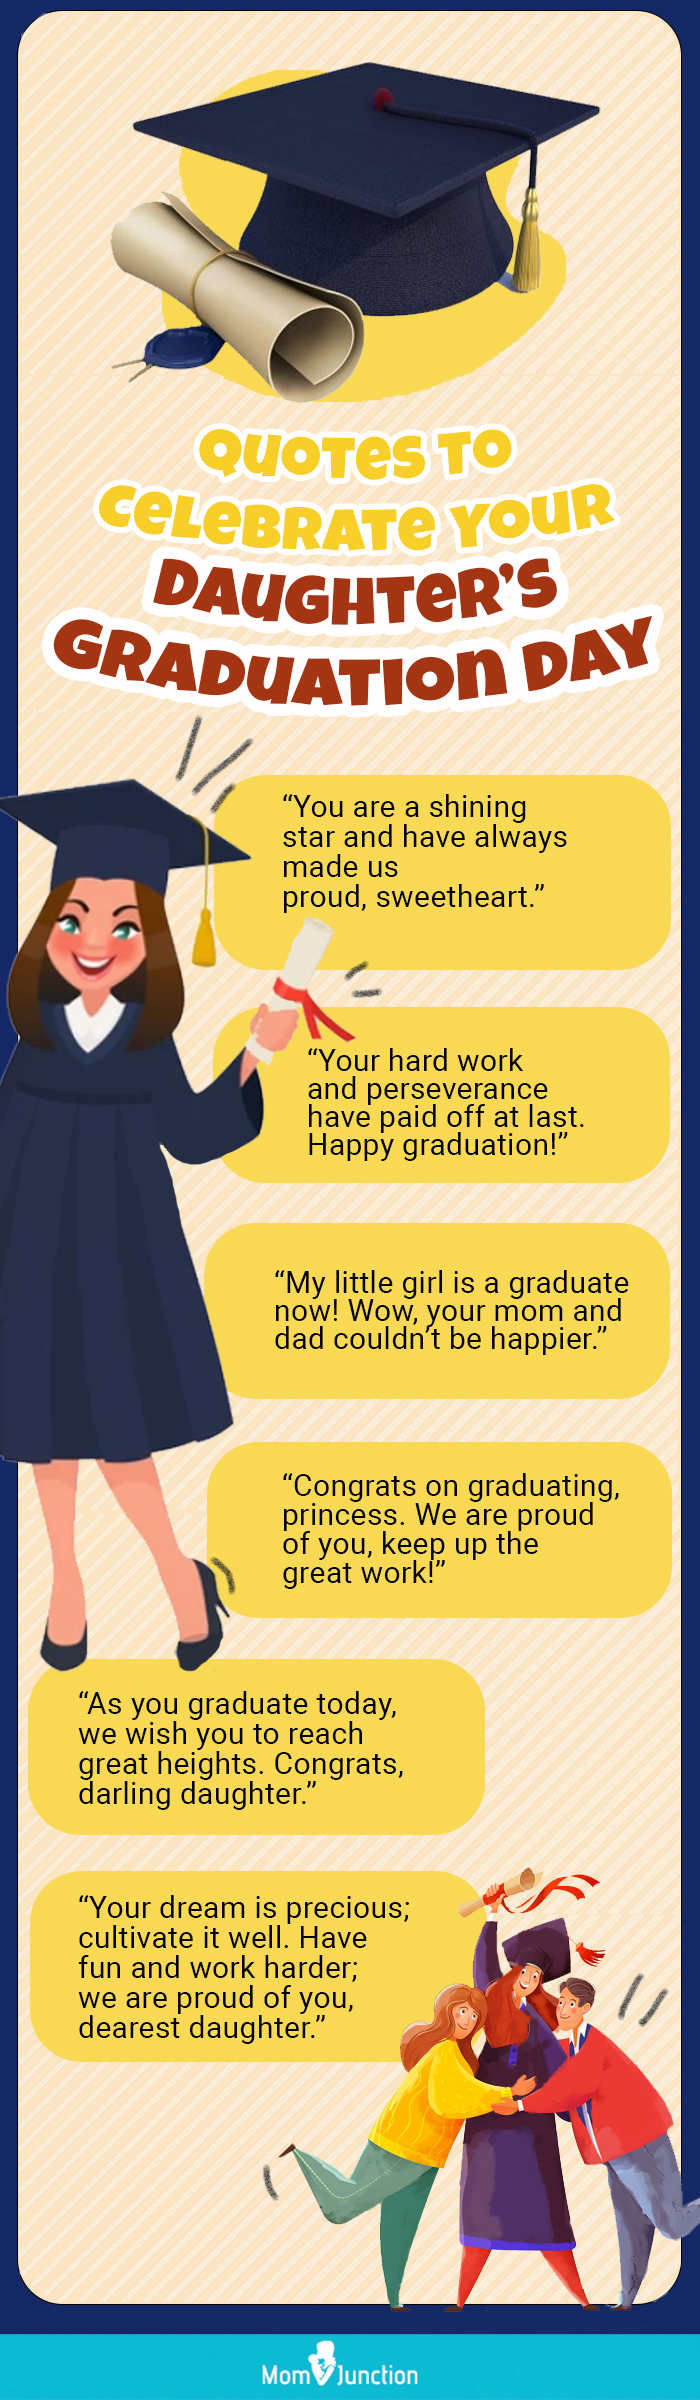 daughters graduation day quotes (infographic)